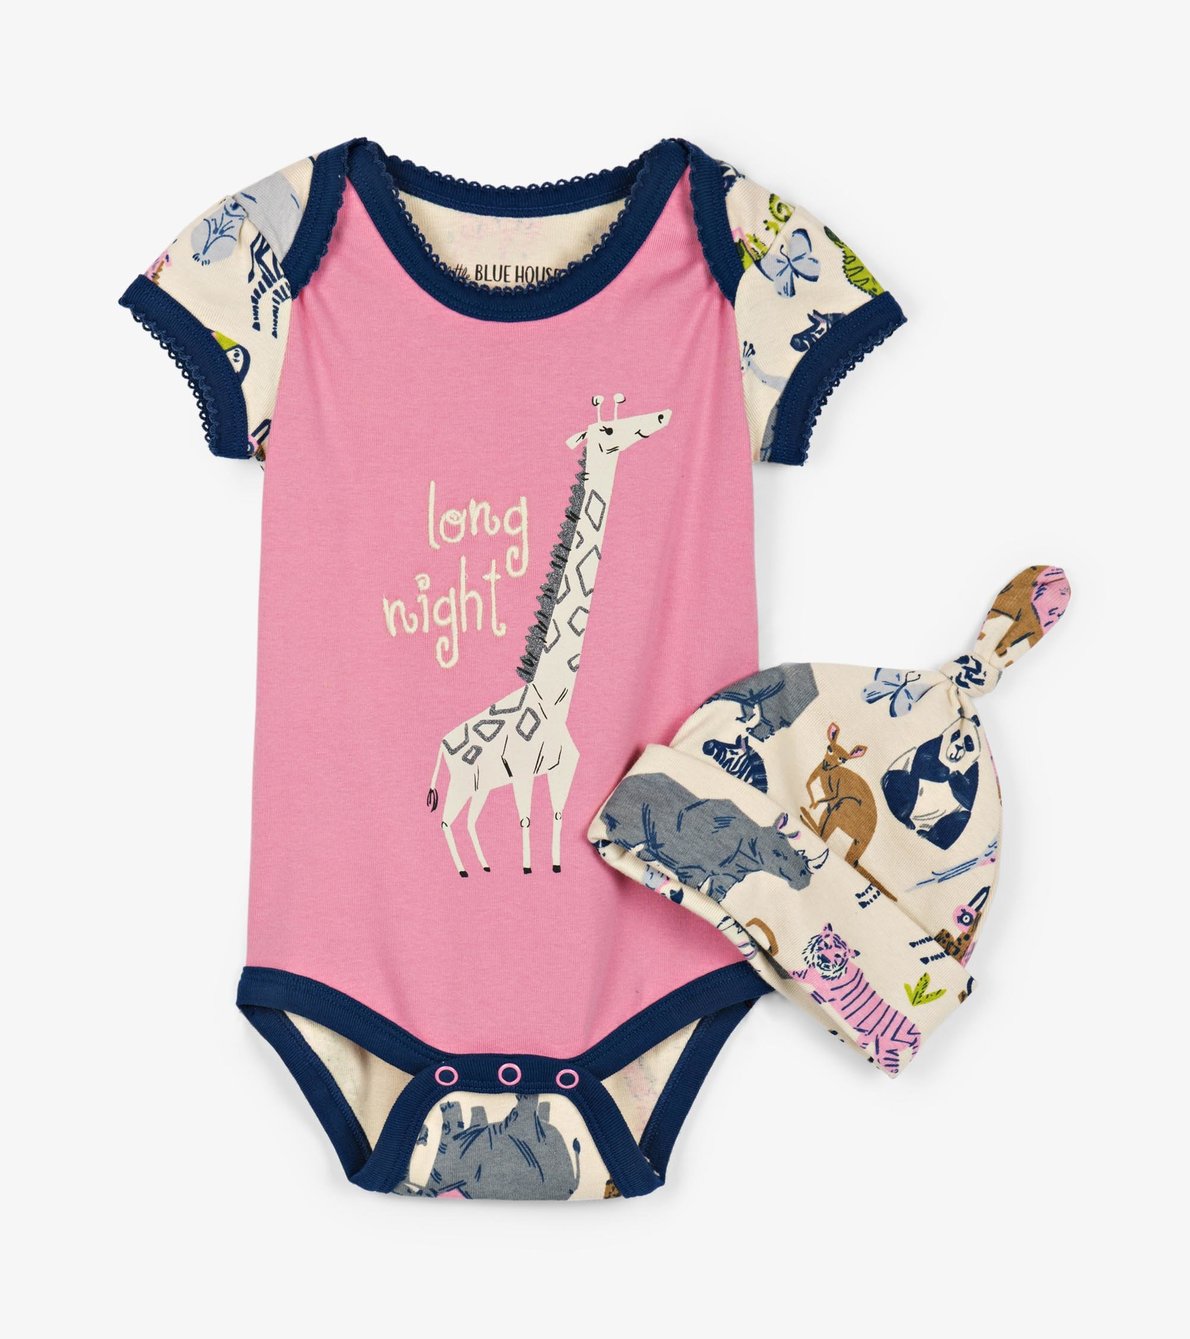 View larger image of Pretty Animal Safari Baby Bodysuit with Hat